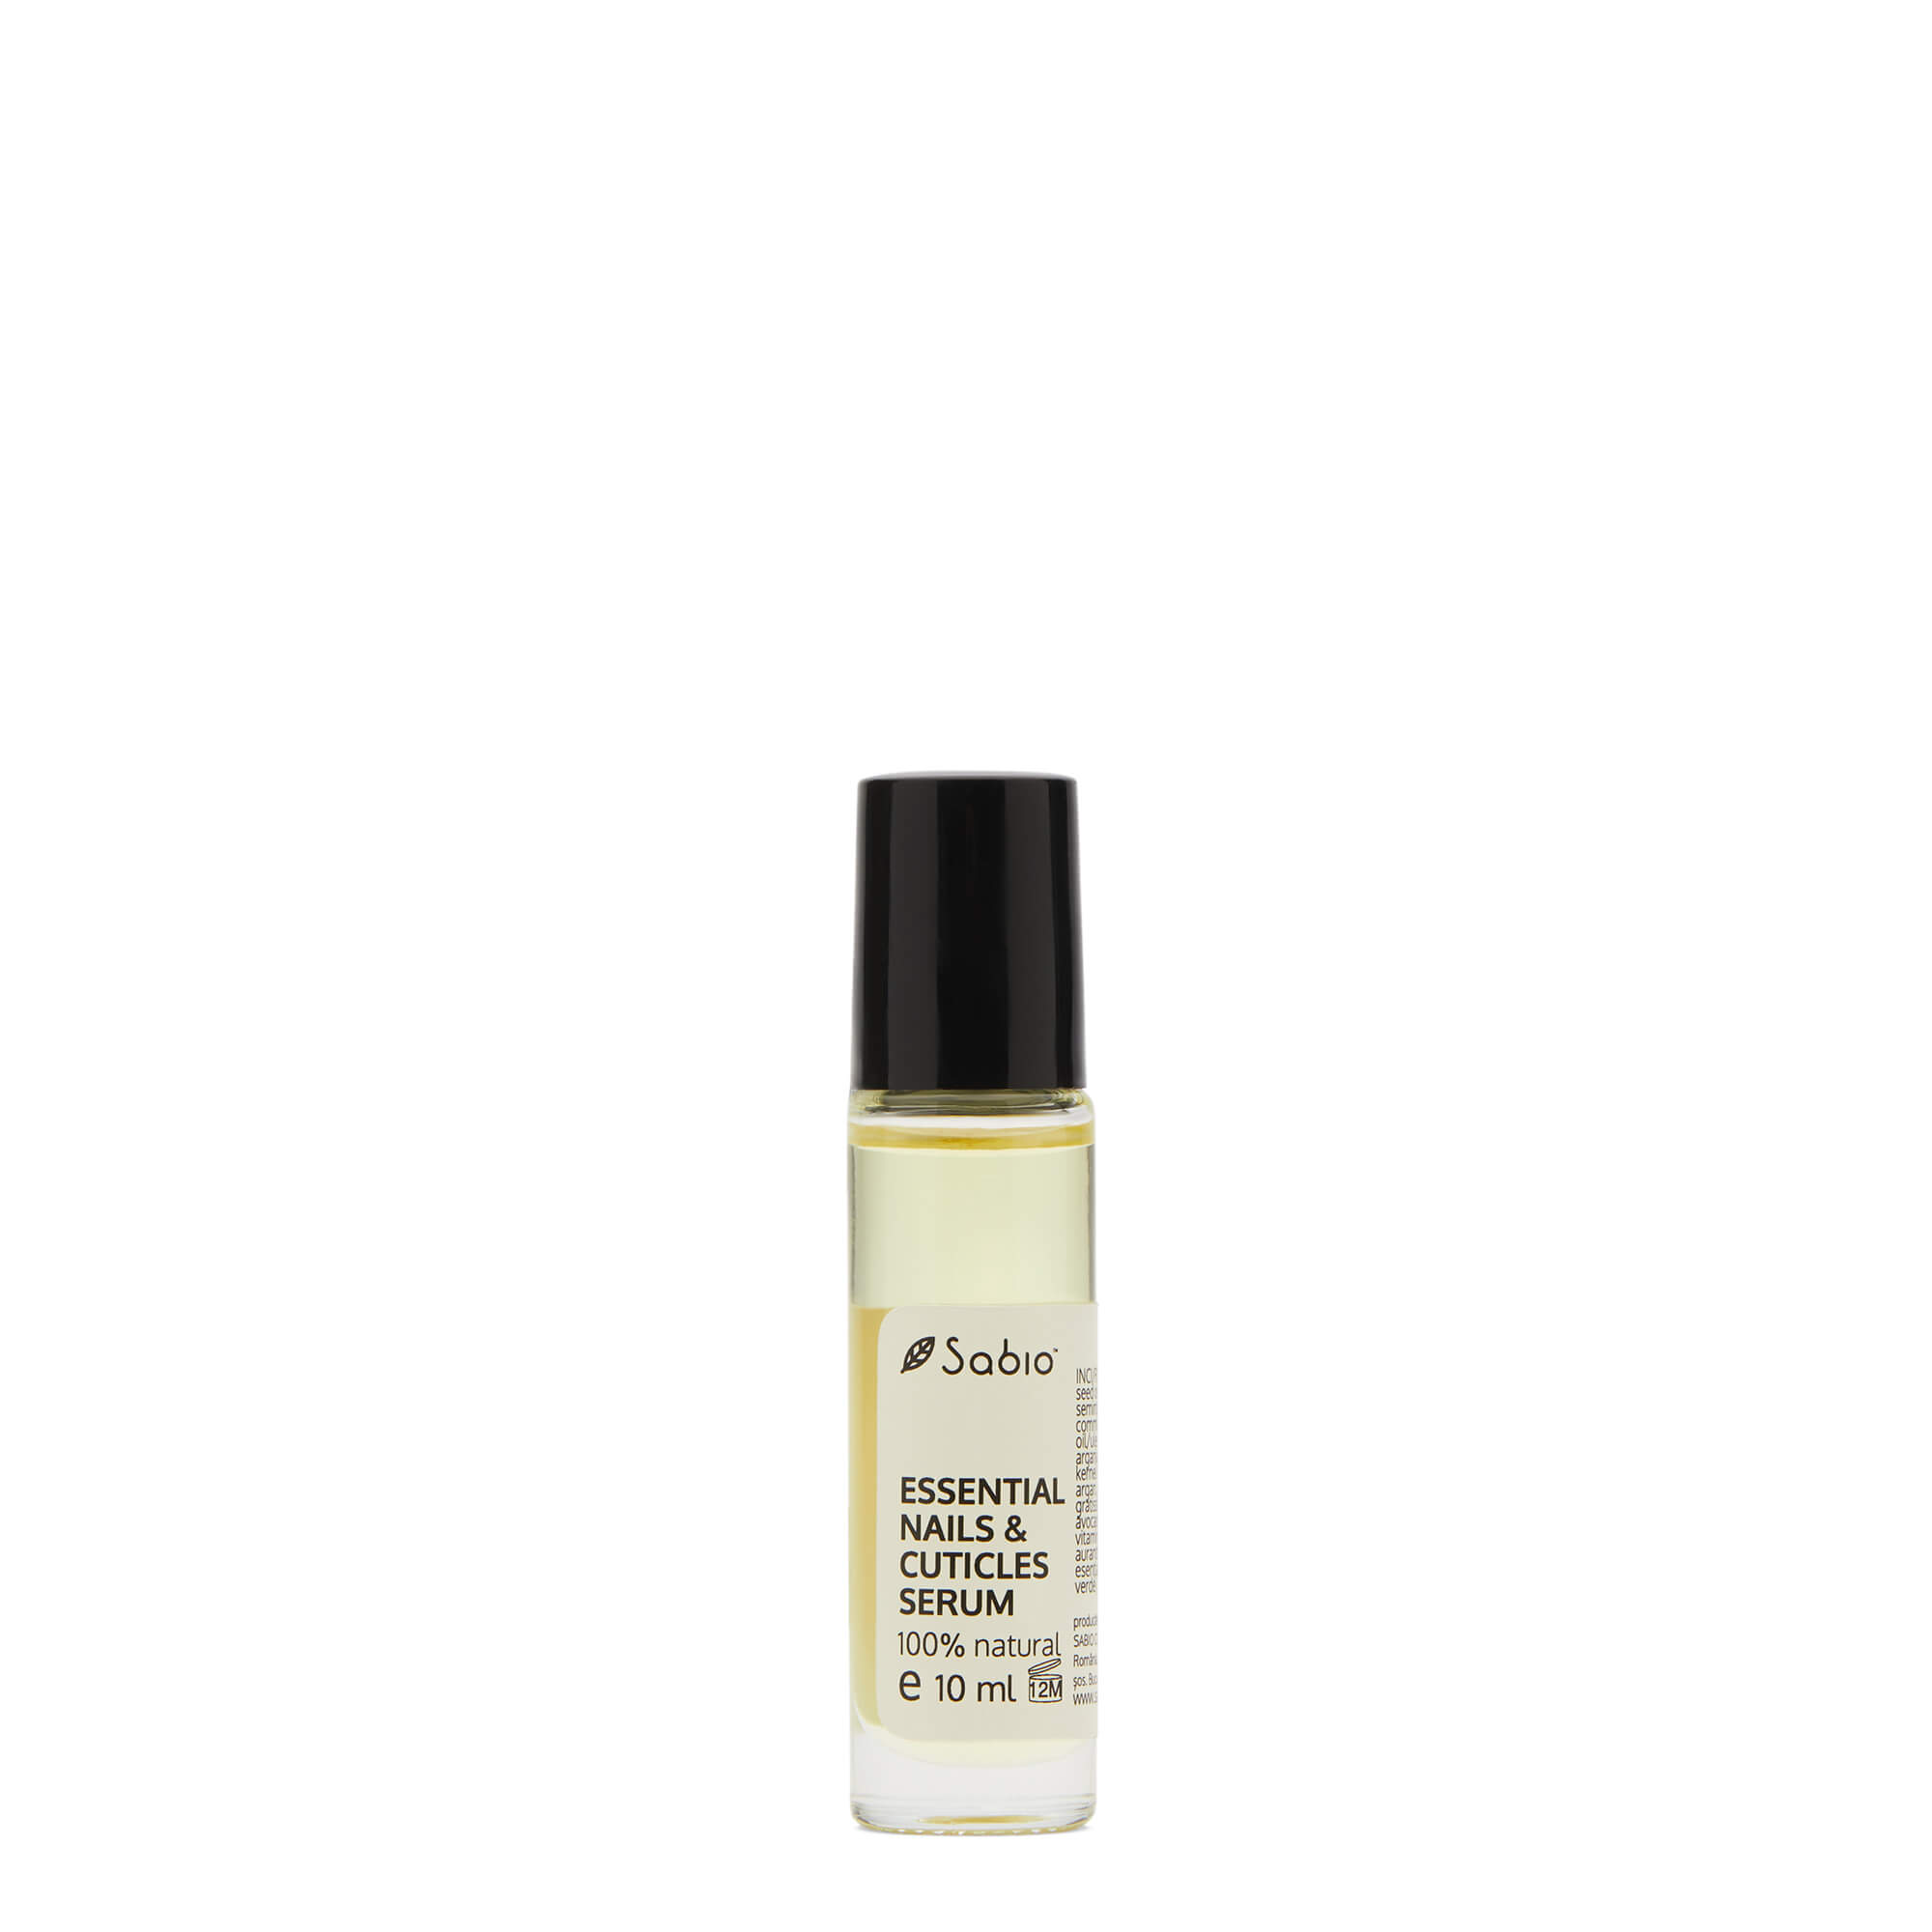 Cuticle and nail serum - Essential